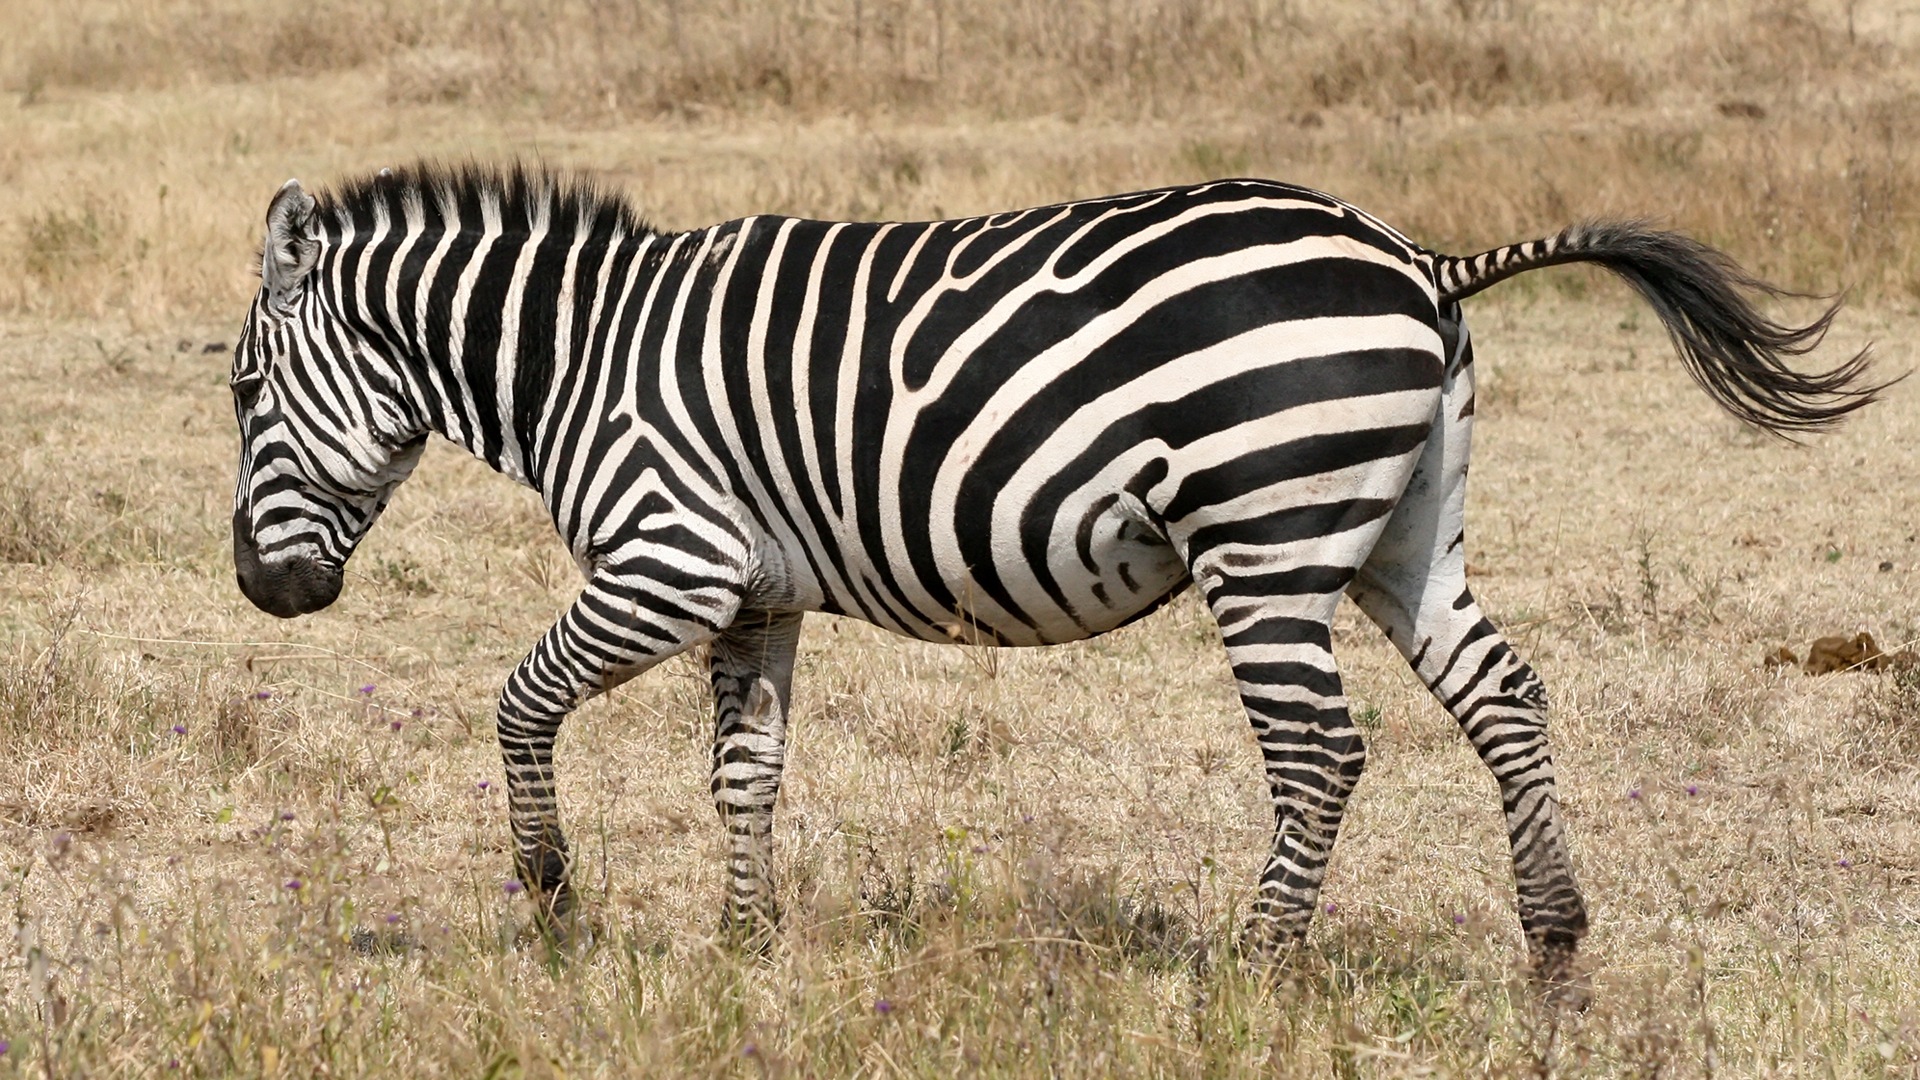 Black and white striped animal, zebra HD wallpapers #18 - 1920x1080